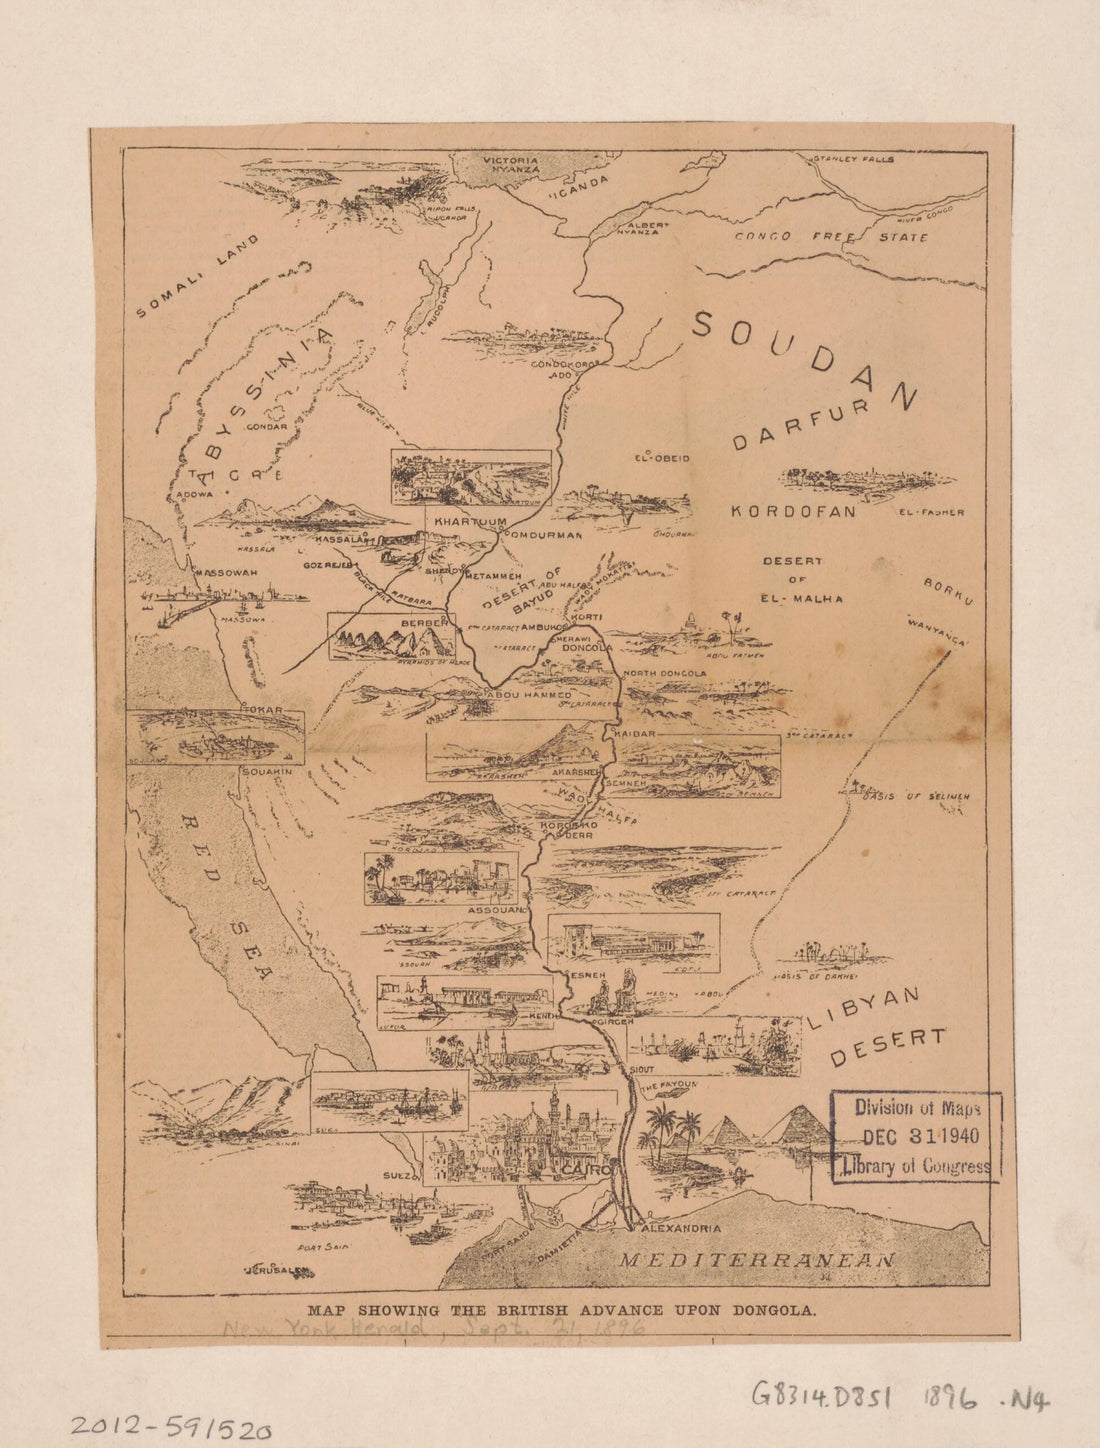 This old map of Map Showing the British Advance Upon Dongola from 1896 was created by Horatio Herbert Kitchener Kitchener, Muḥammad Aḥmad Mahdī,  New York Herald Company in 1896